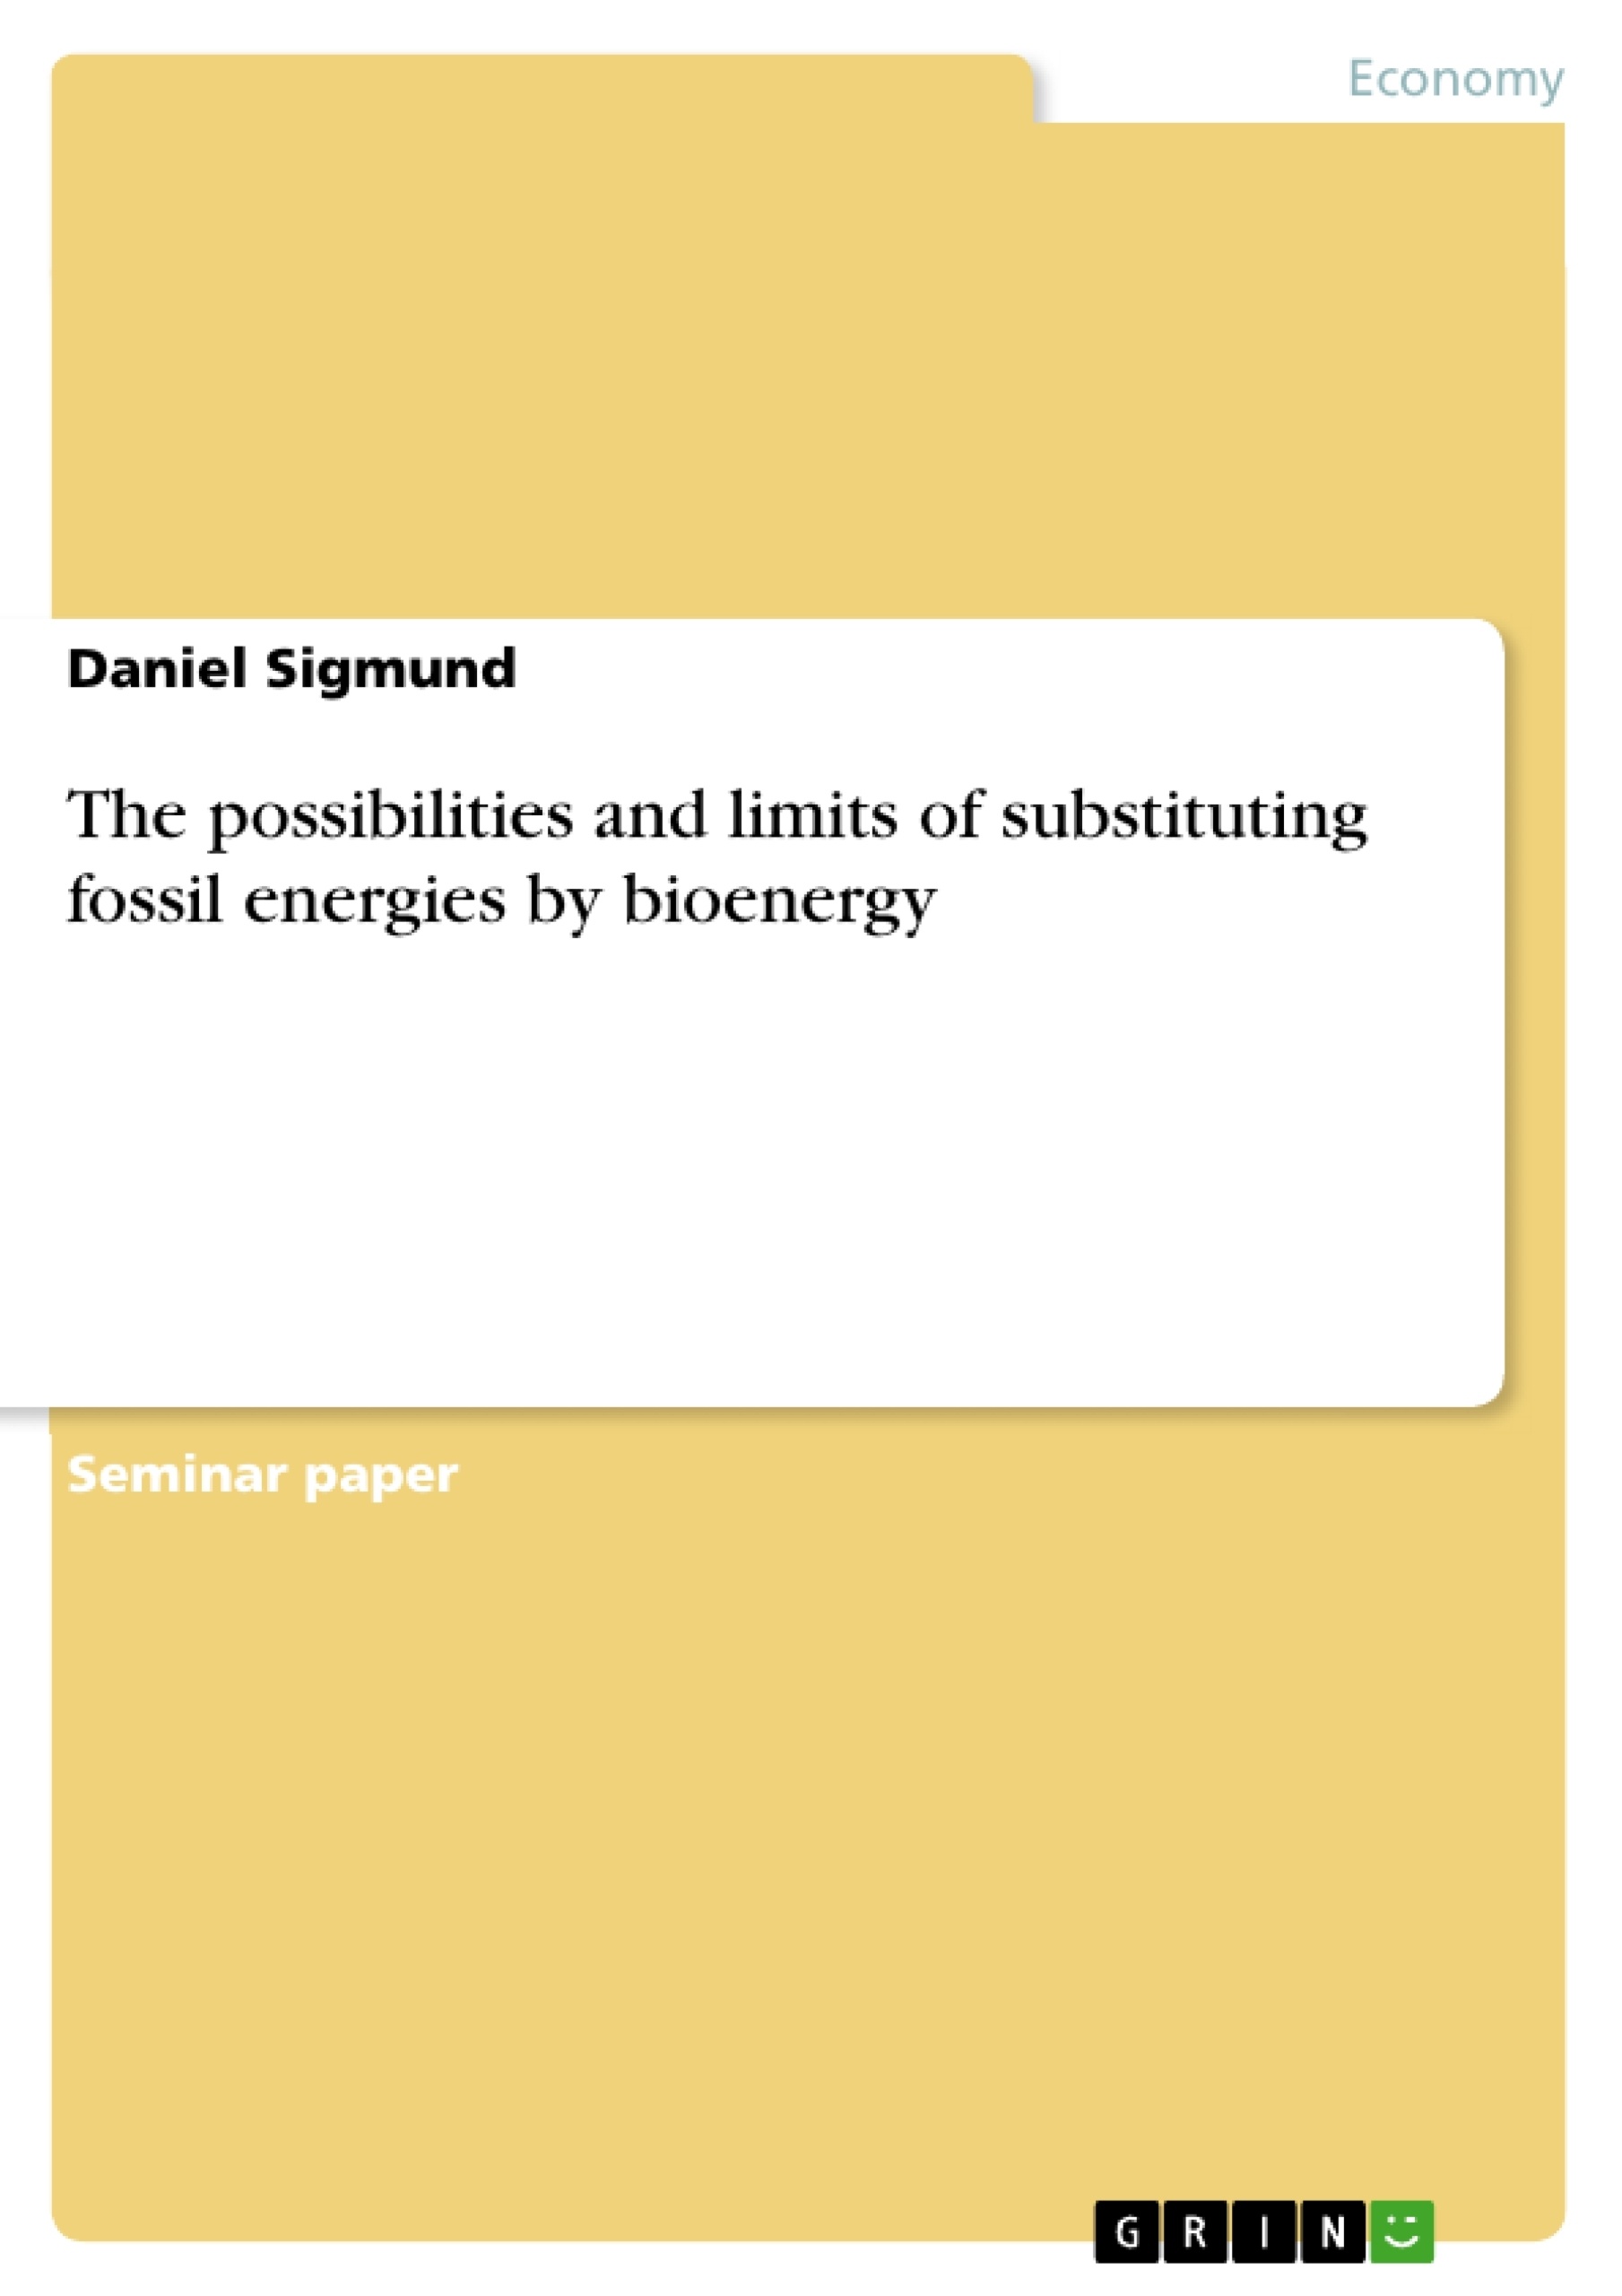 Titel: The possibilities and limits of substituting fossil energies by bioenergy